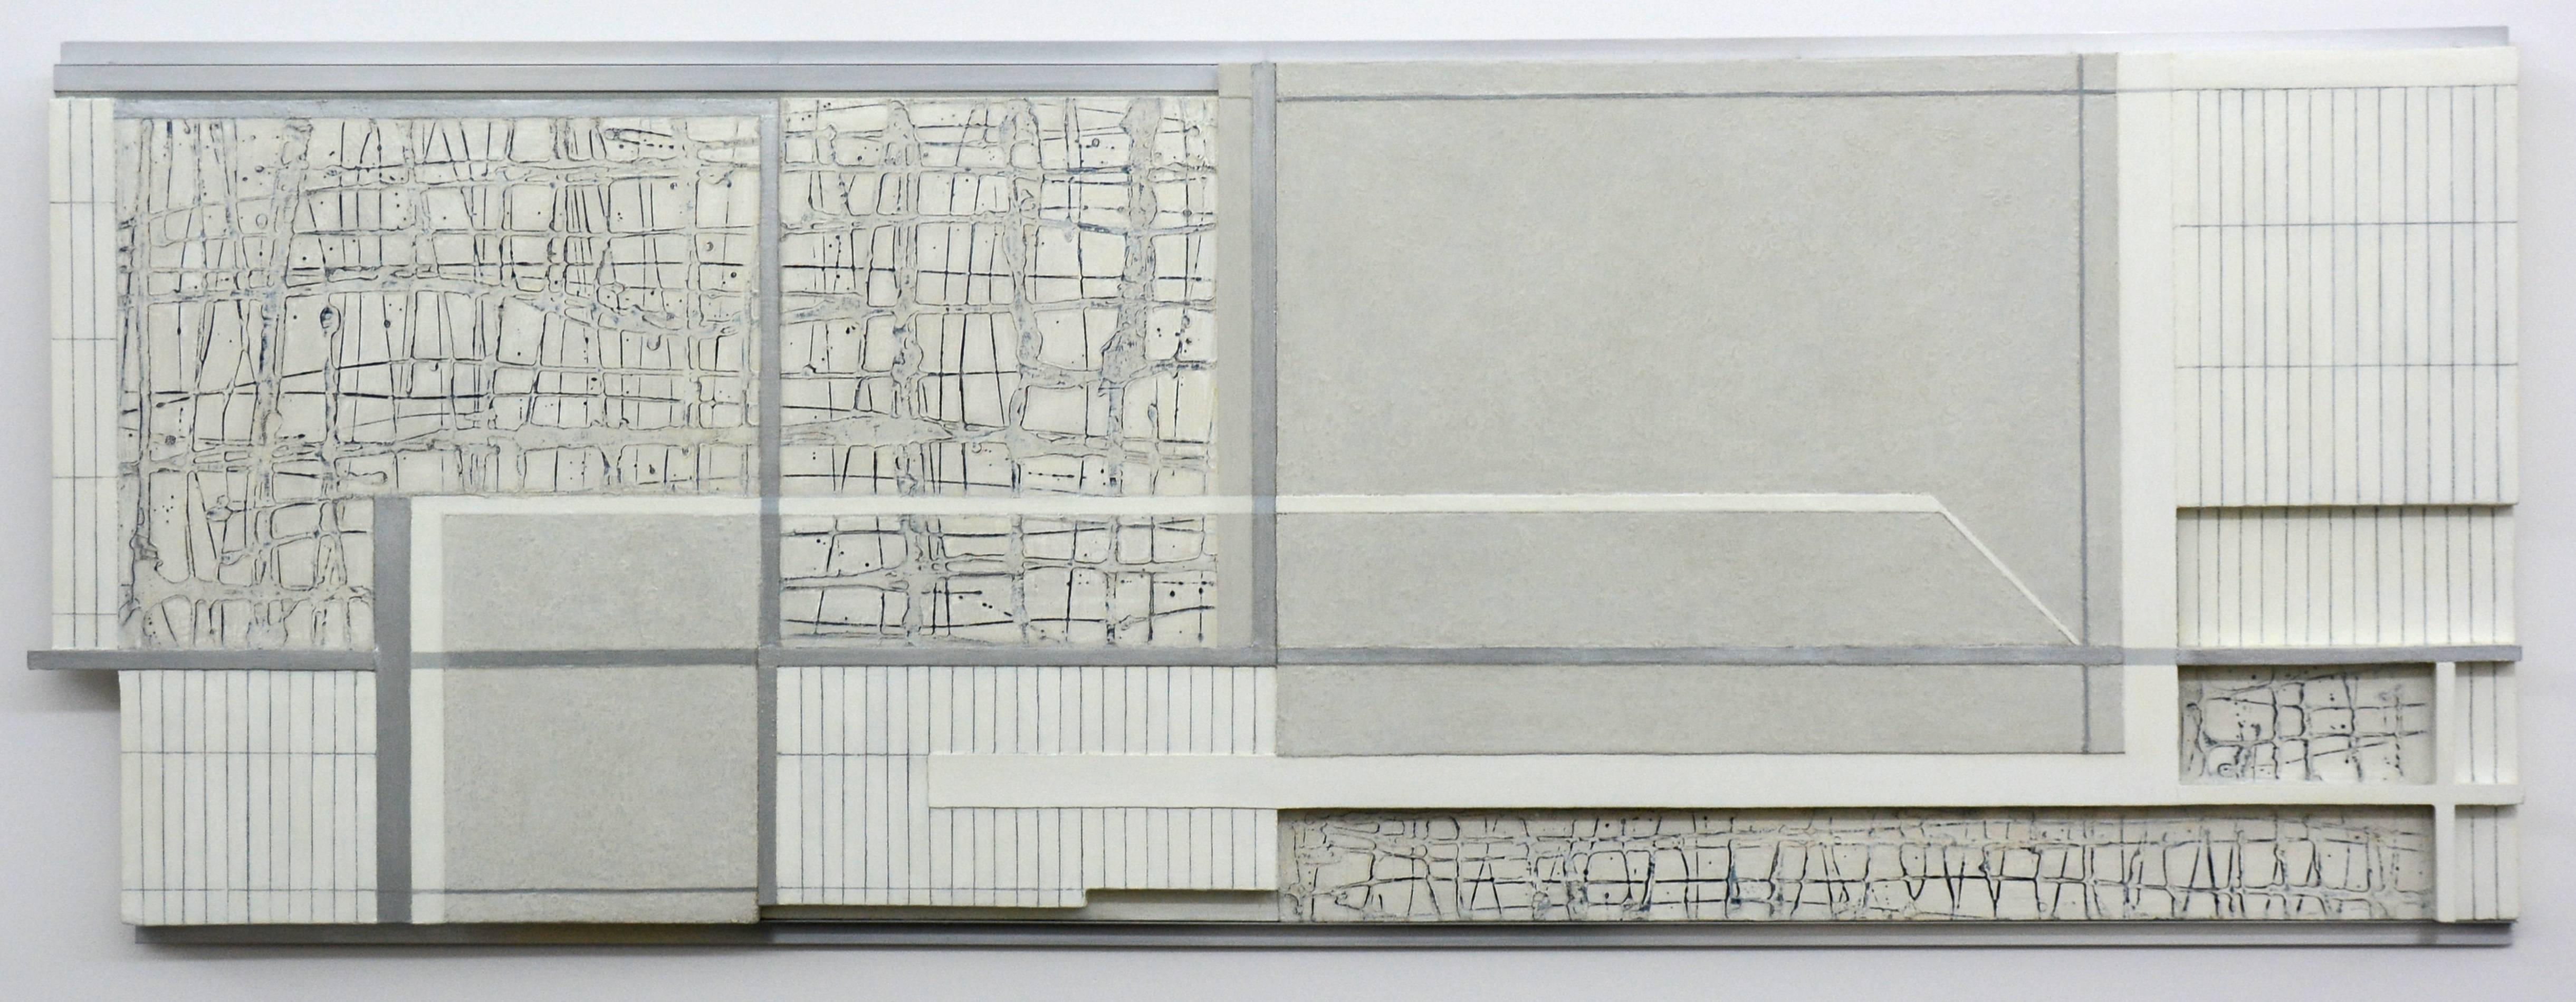 Interweave - White, grey, silver, abstract, three dimensional, wall sculpture